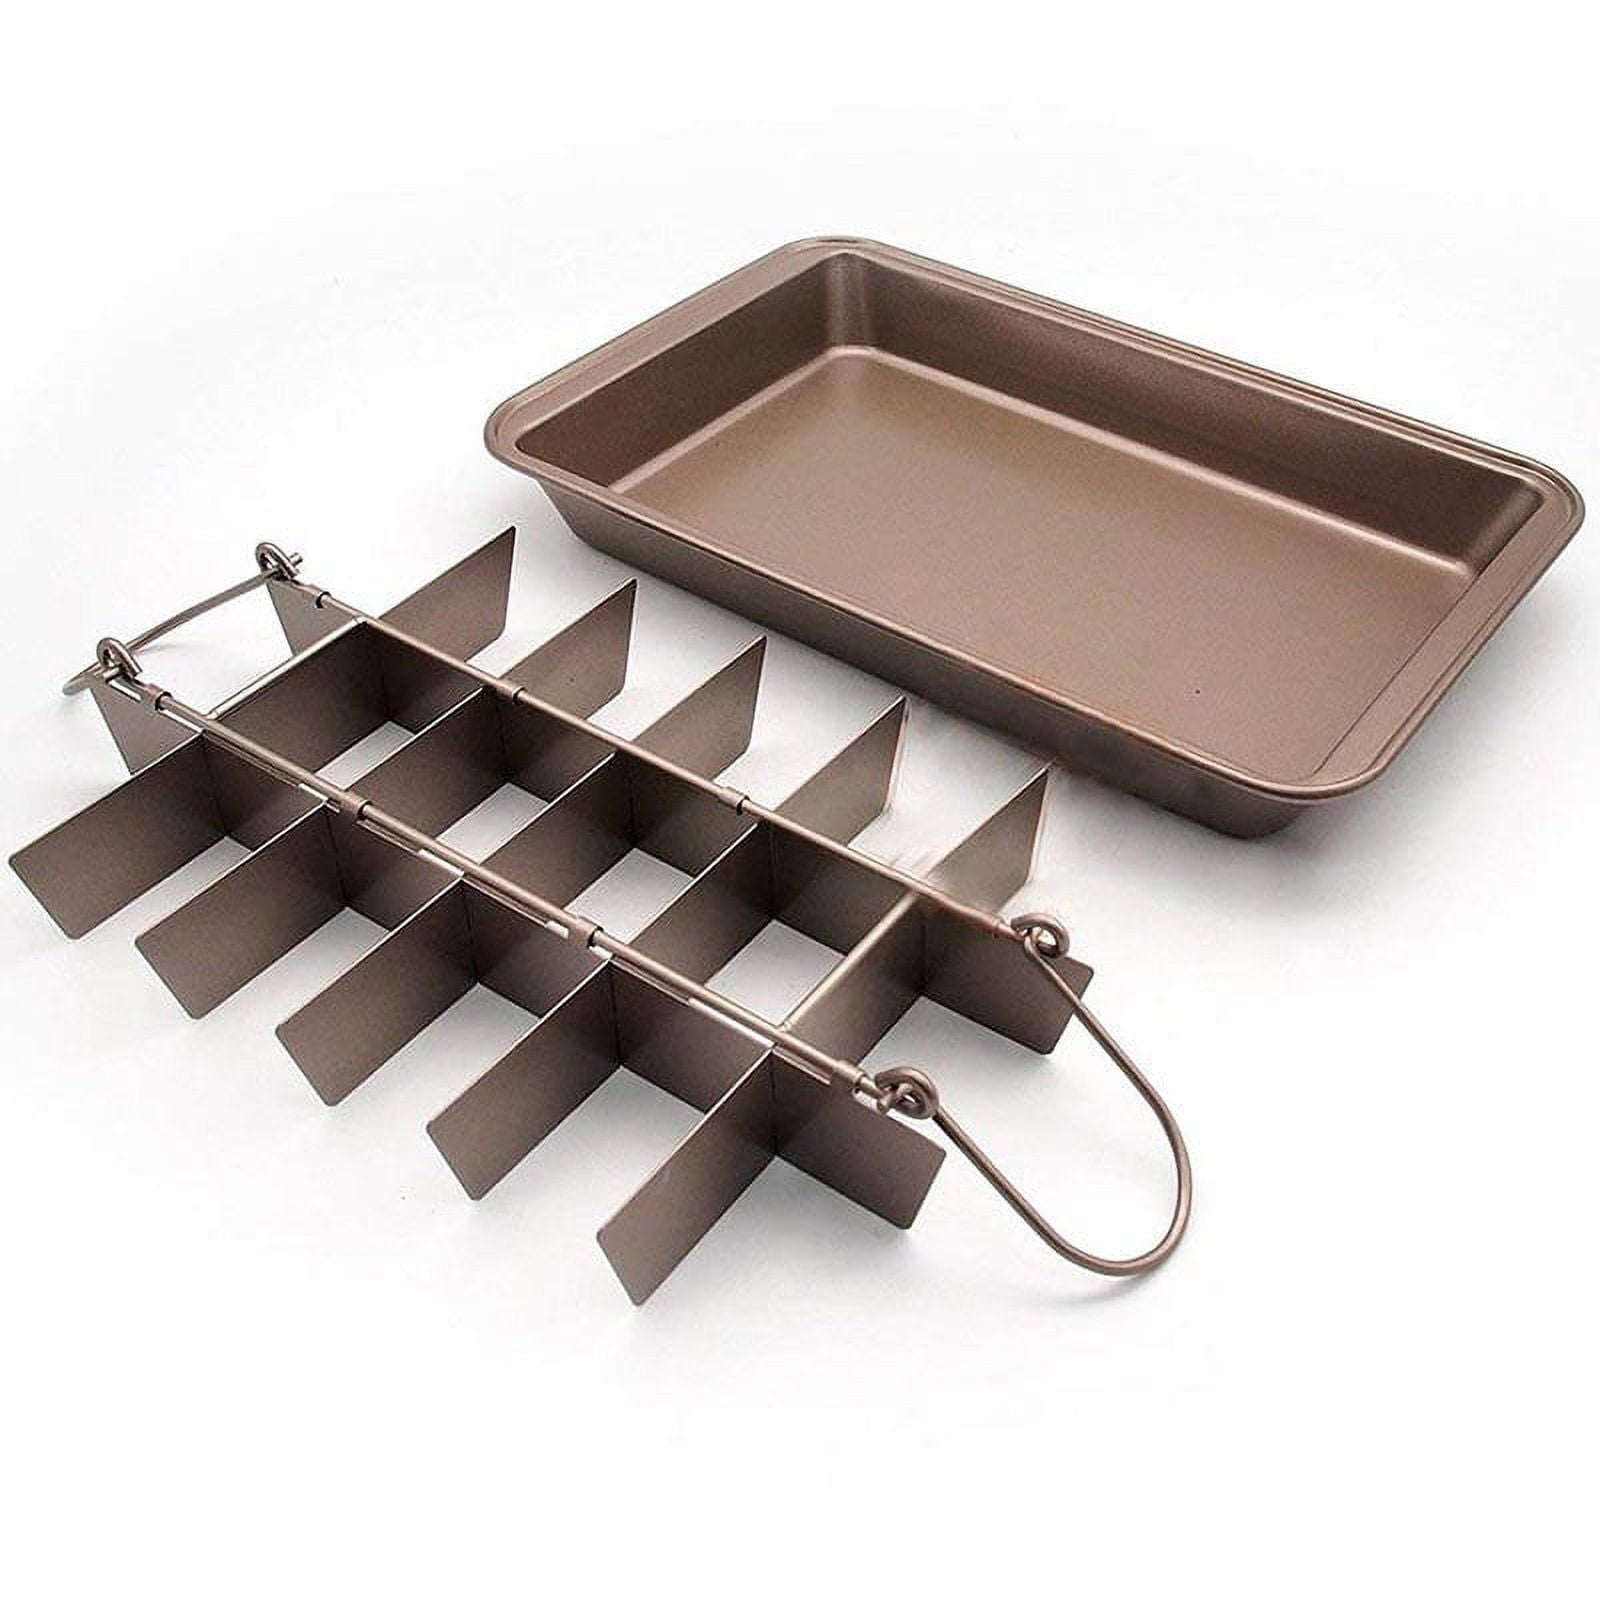 18 Holes Brownie Baking Pan with Built-In Slicer Square Lattice